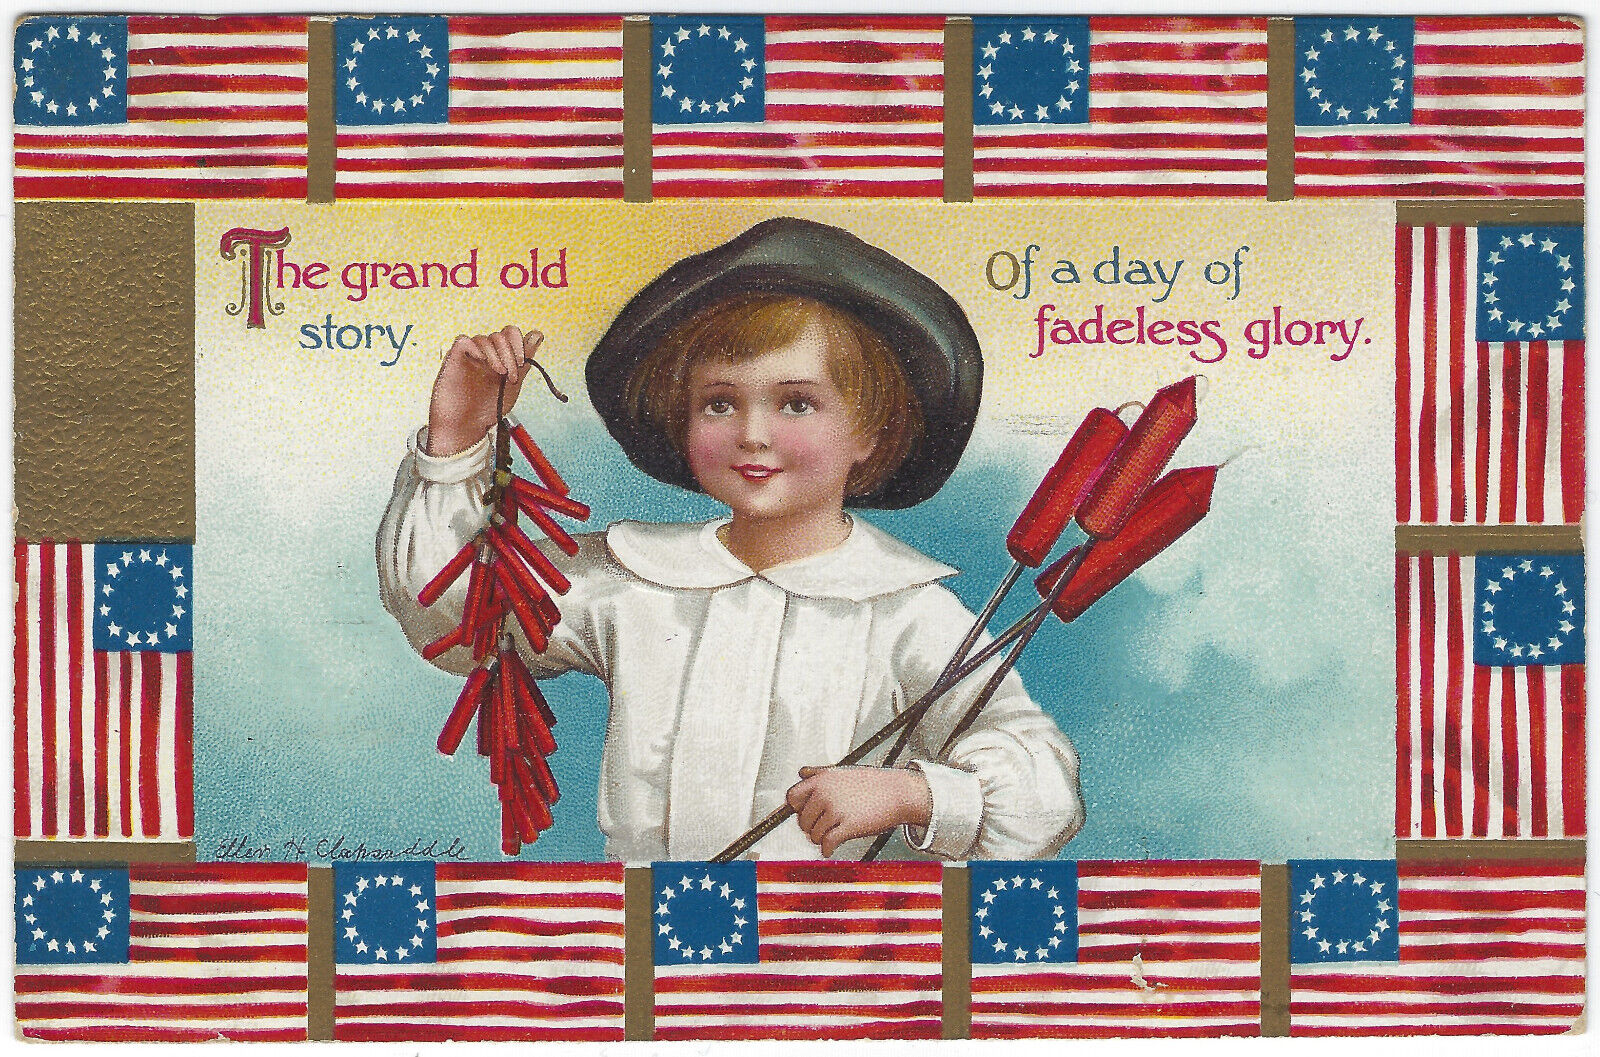 Clapsaddle July 4th Boy w/Fireworks 13 Flags Border A/S PC Emb Gilded Vtg c1913